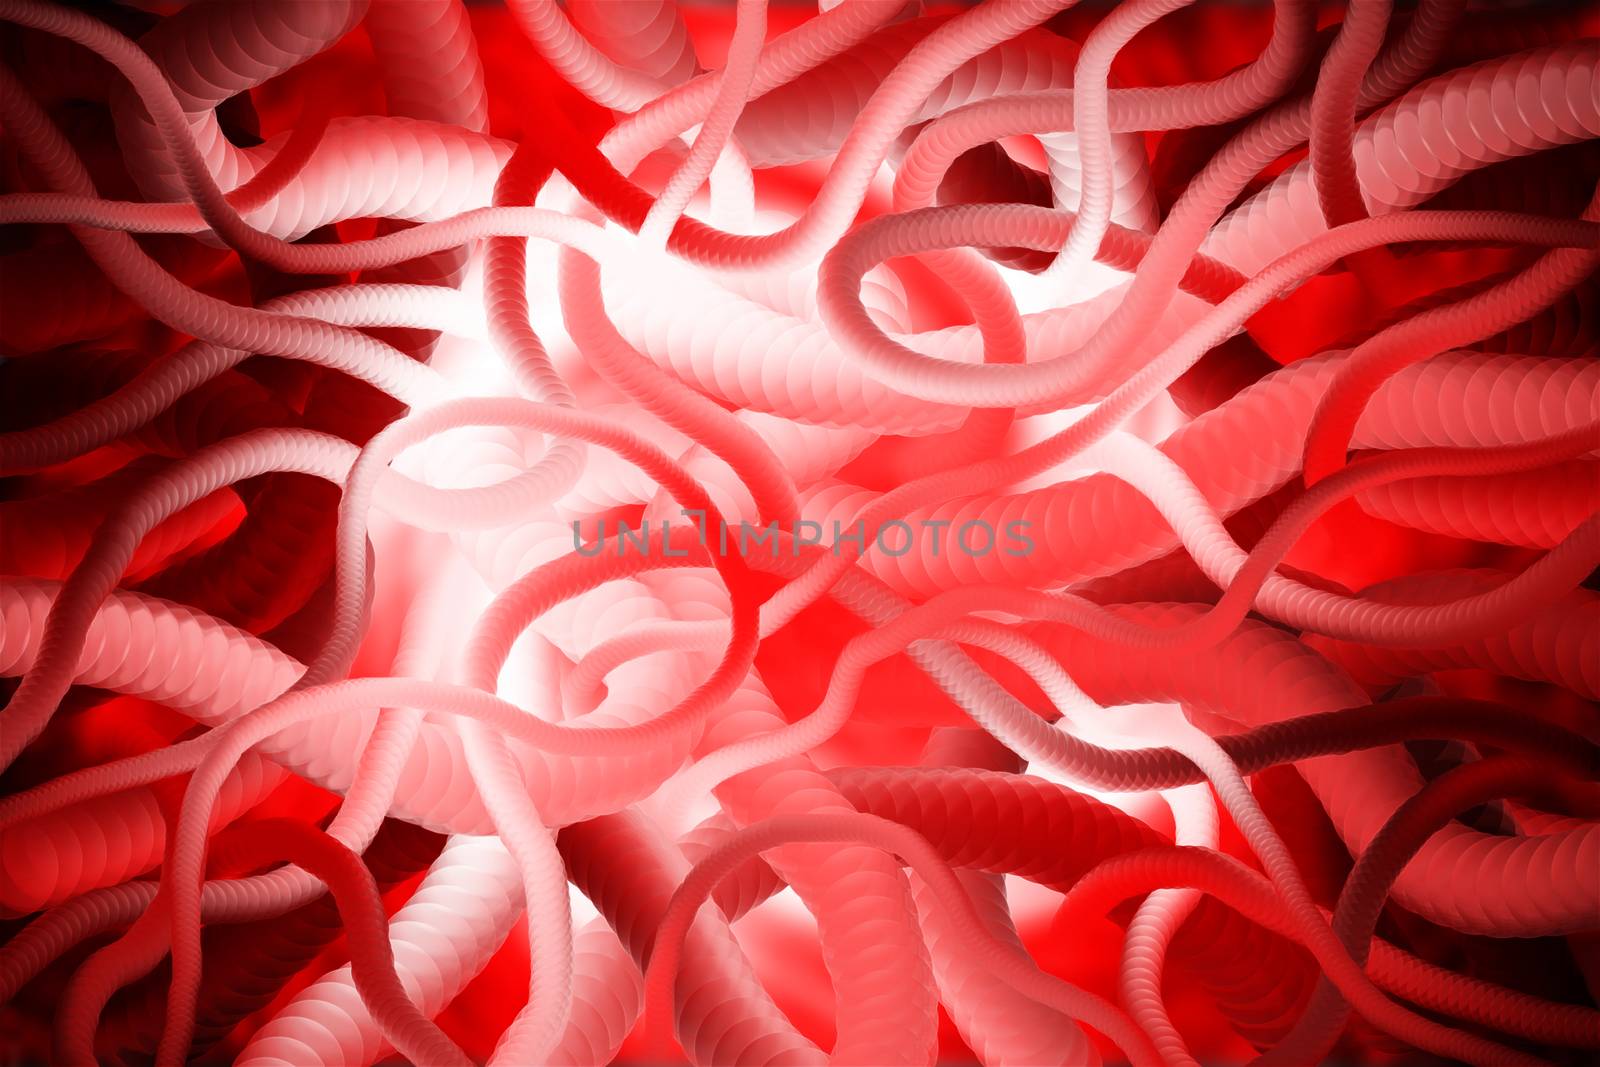 Sea snakes abstract art background by Nonneljohn